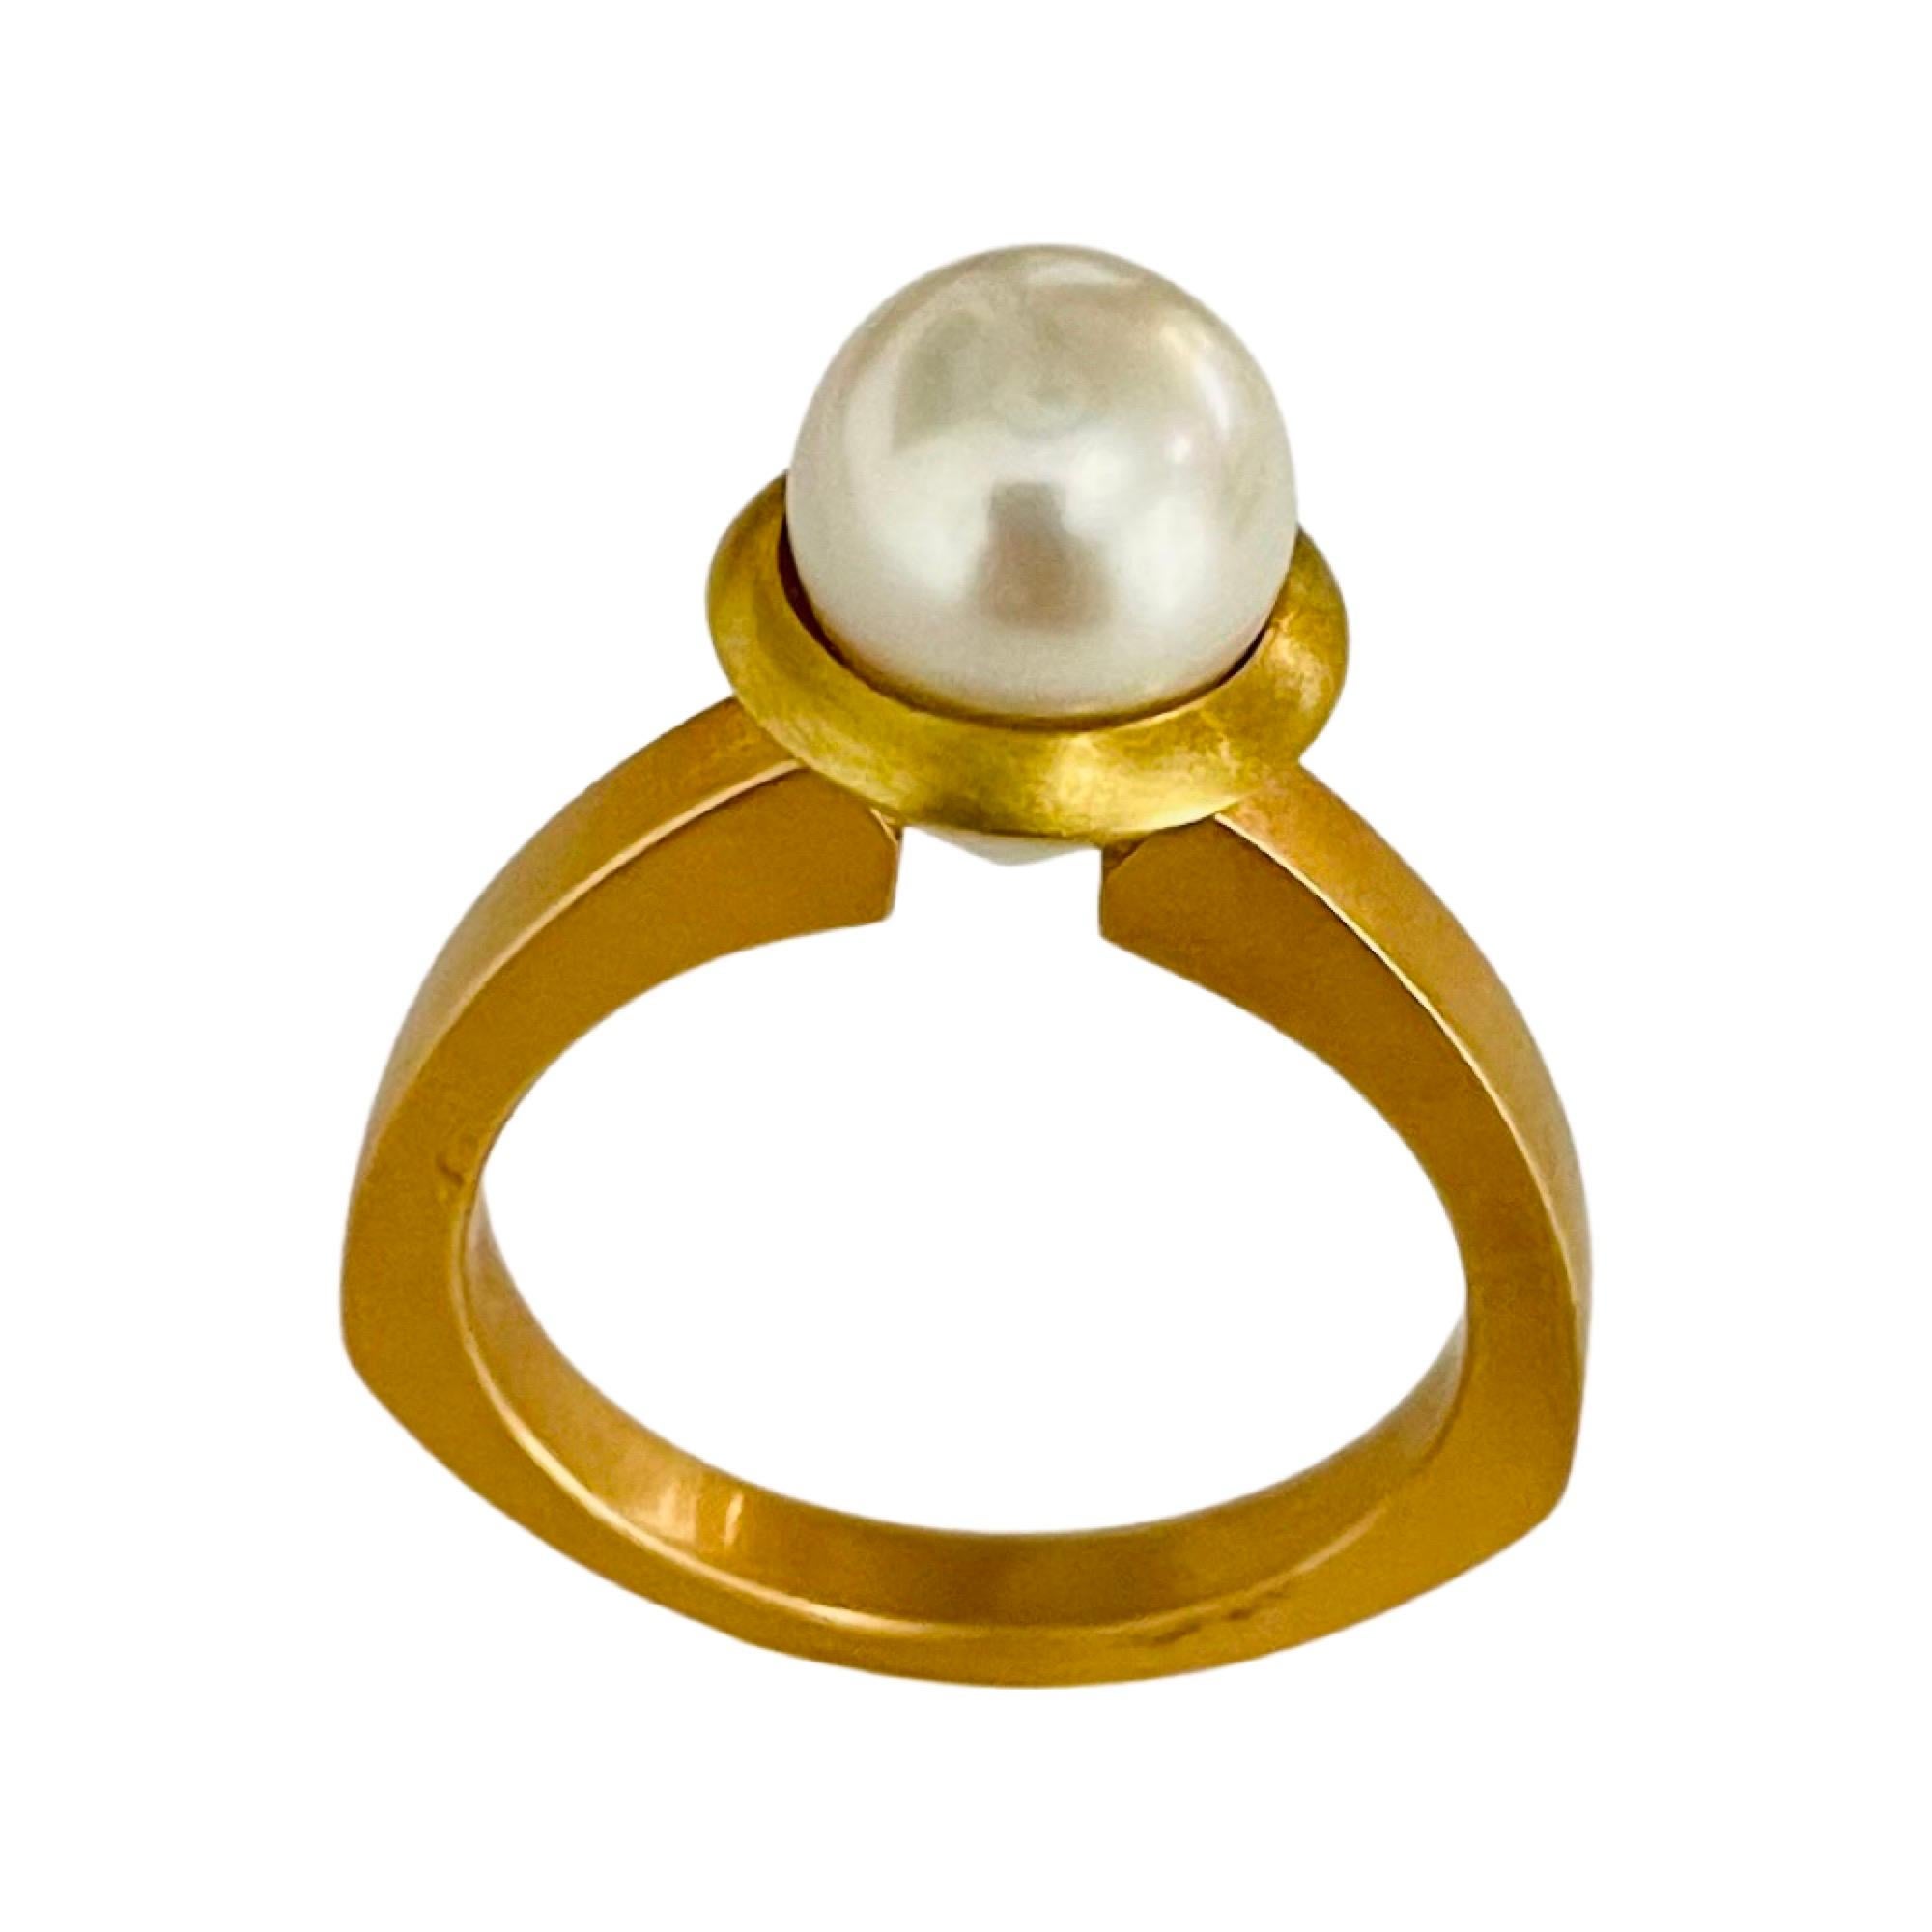 Gellner 18K Yellow and Rose Gold Cultured Japanese Akoya Pearl Ring. The Akoya Pearl is 7.7 mm. The pearl is round, with high luster, rose overtone and slight blemishes.  The ring is 9.5 mm at the top and tapers to 2.75 mm at the base of the shank. 